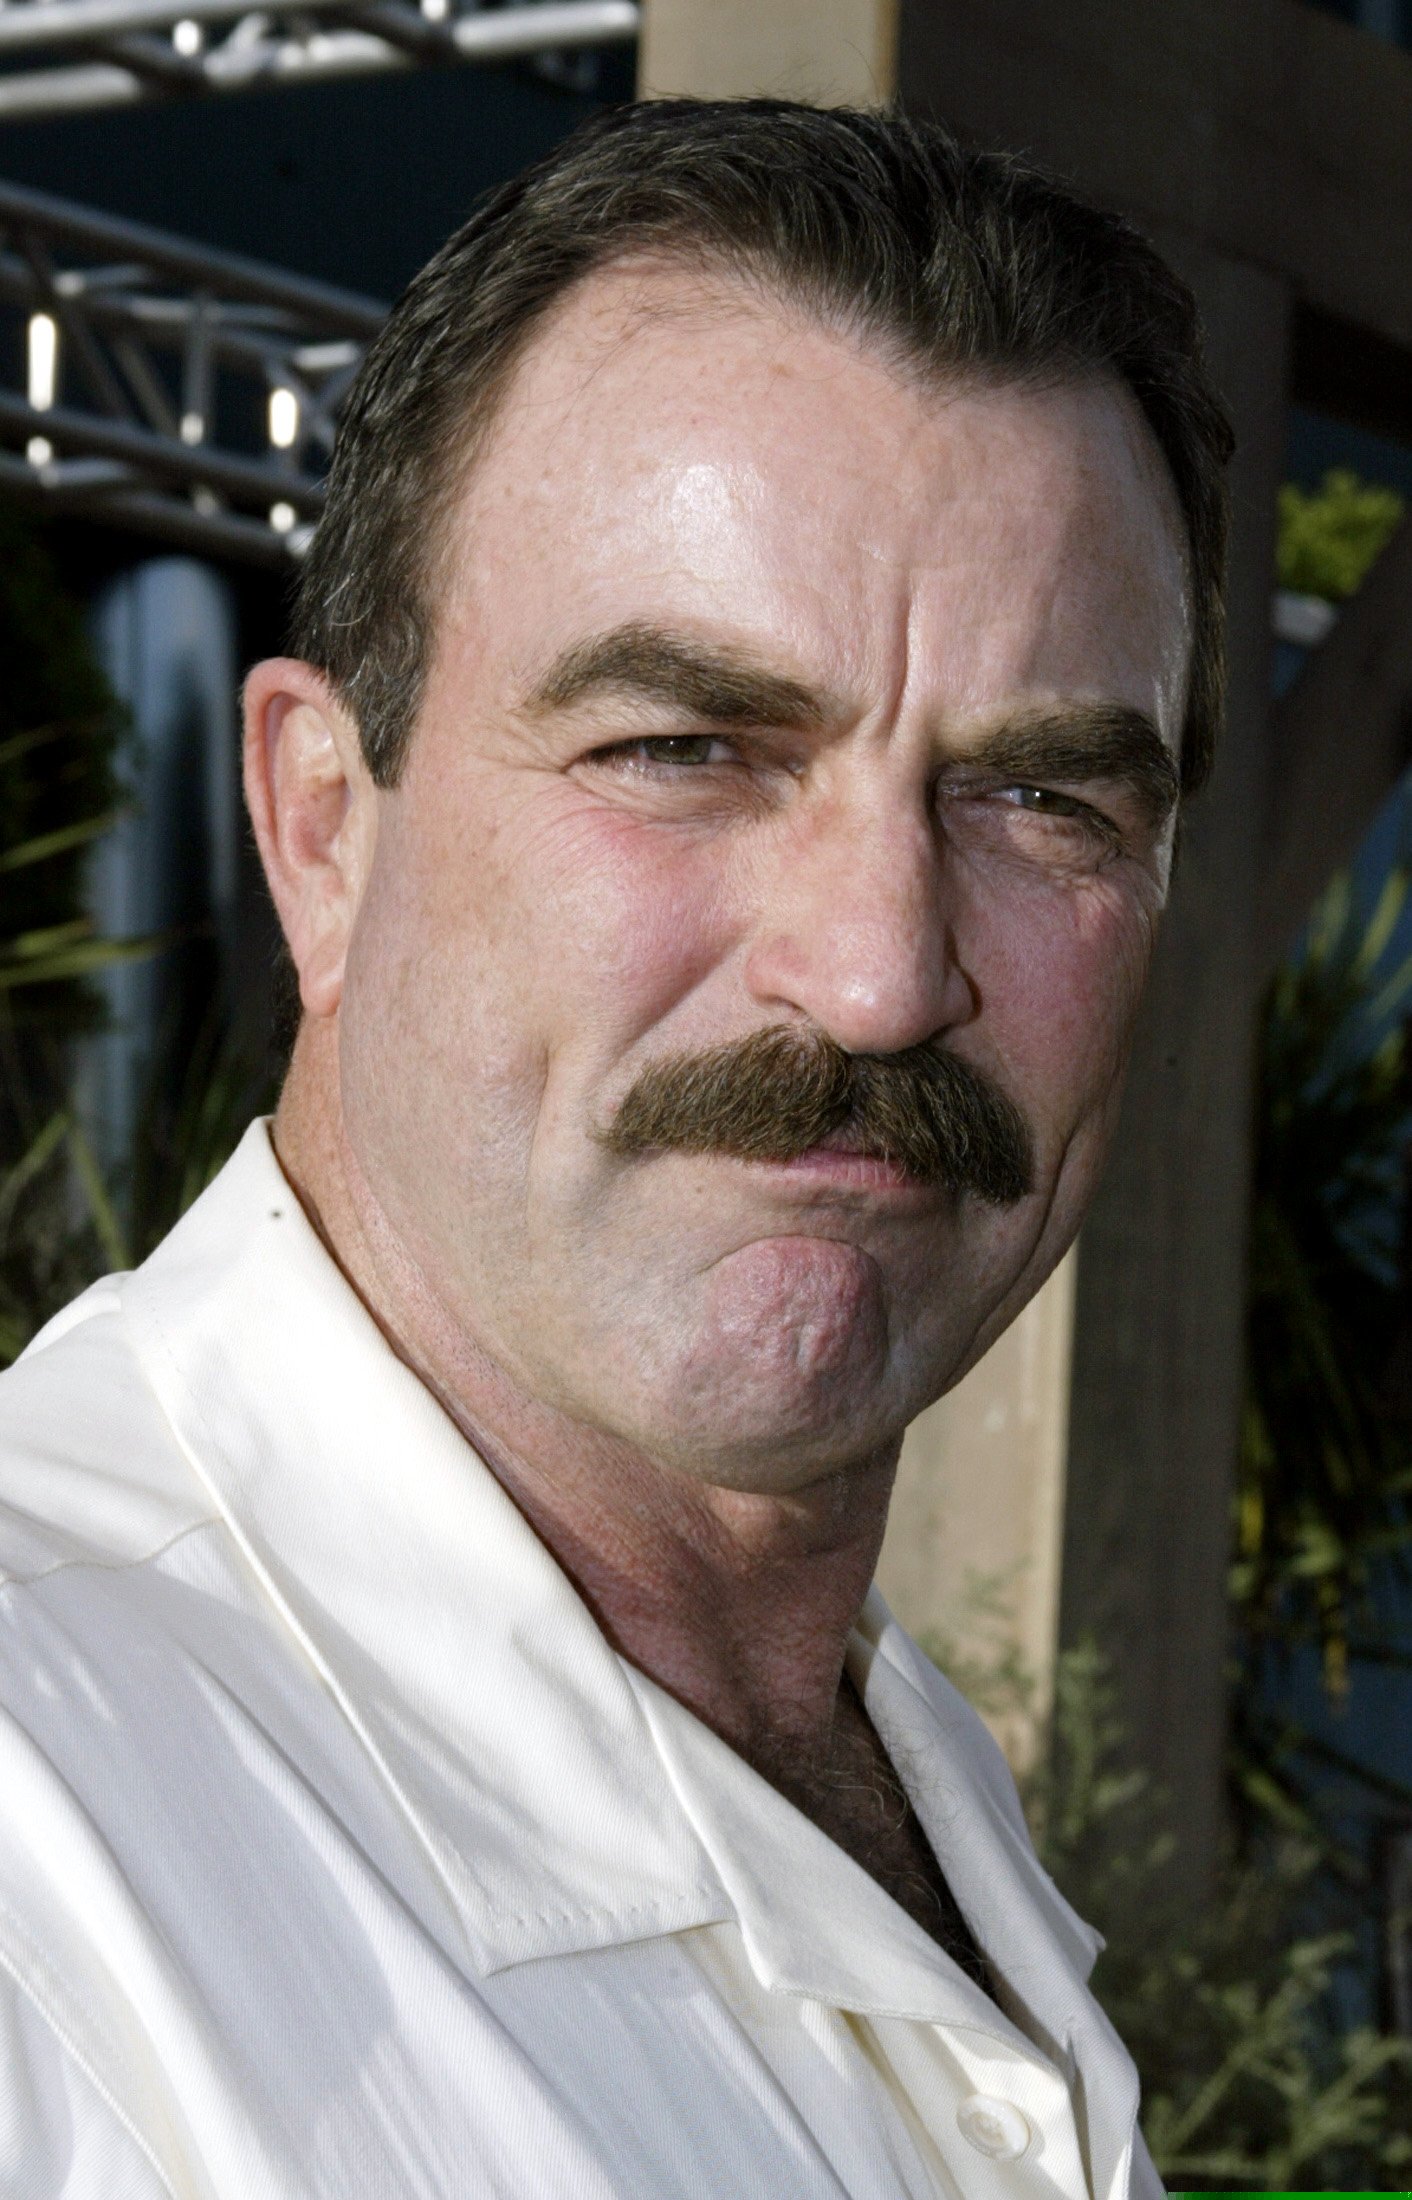 Actor Tom Selleck arrives as a guest at the premiere of the new Western film "Open Range" in Hollywood August 11, 2003. [Kevin Costner directed and stars in the film about a group of cowboys who are moving their cattle across the prairies of the west. The film, also stars Robert Duvall and Annette Bening and opens August 15 in the United States.]